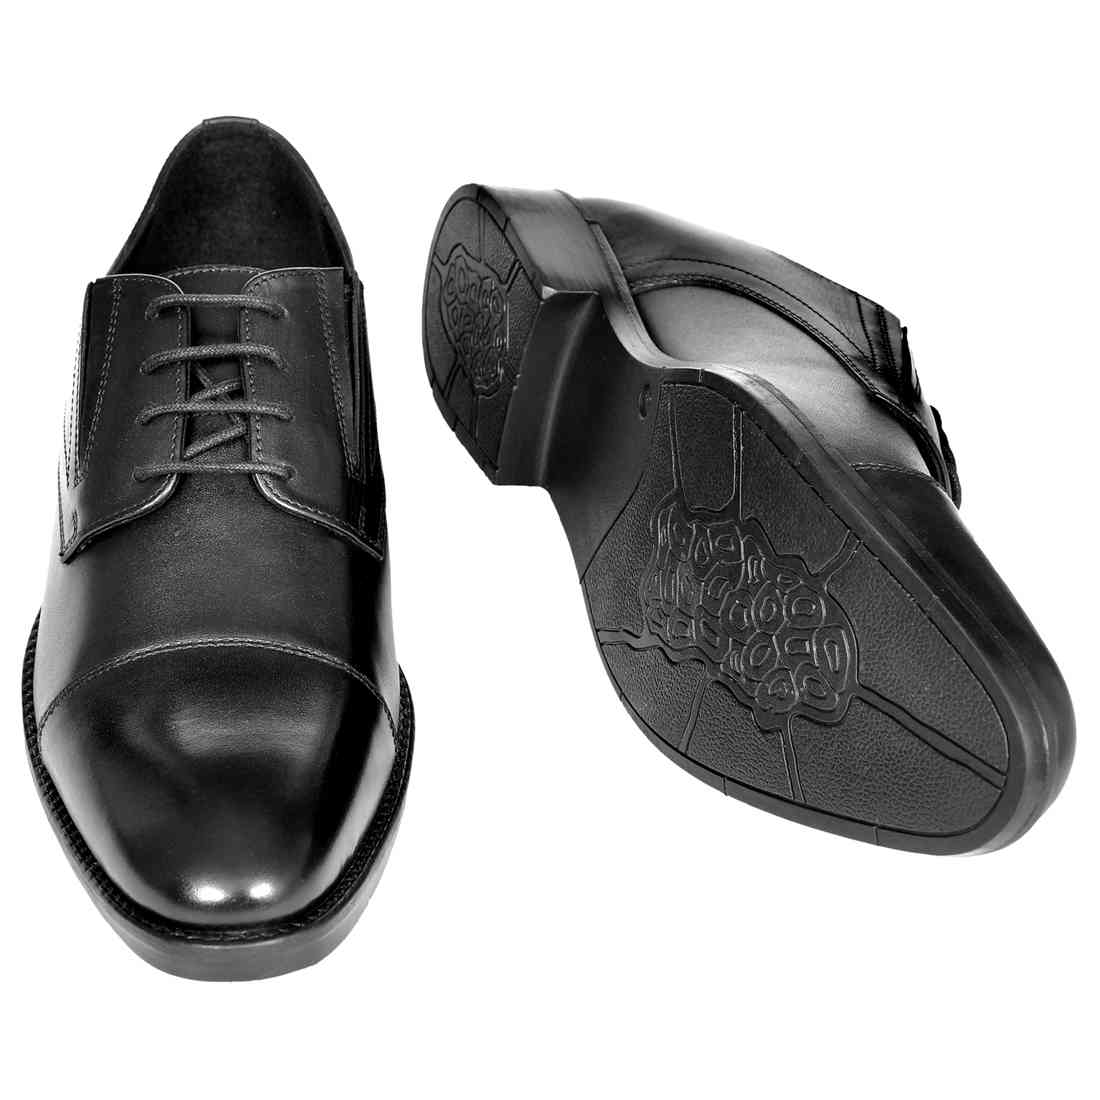 OHM New York Cap Toe Lace up Shoes with Slip-on Option